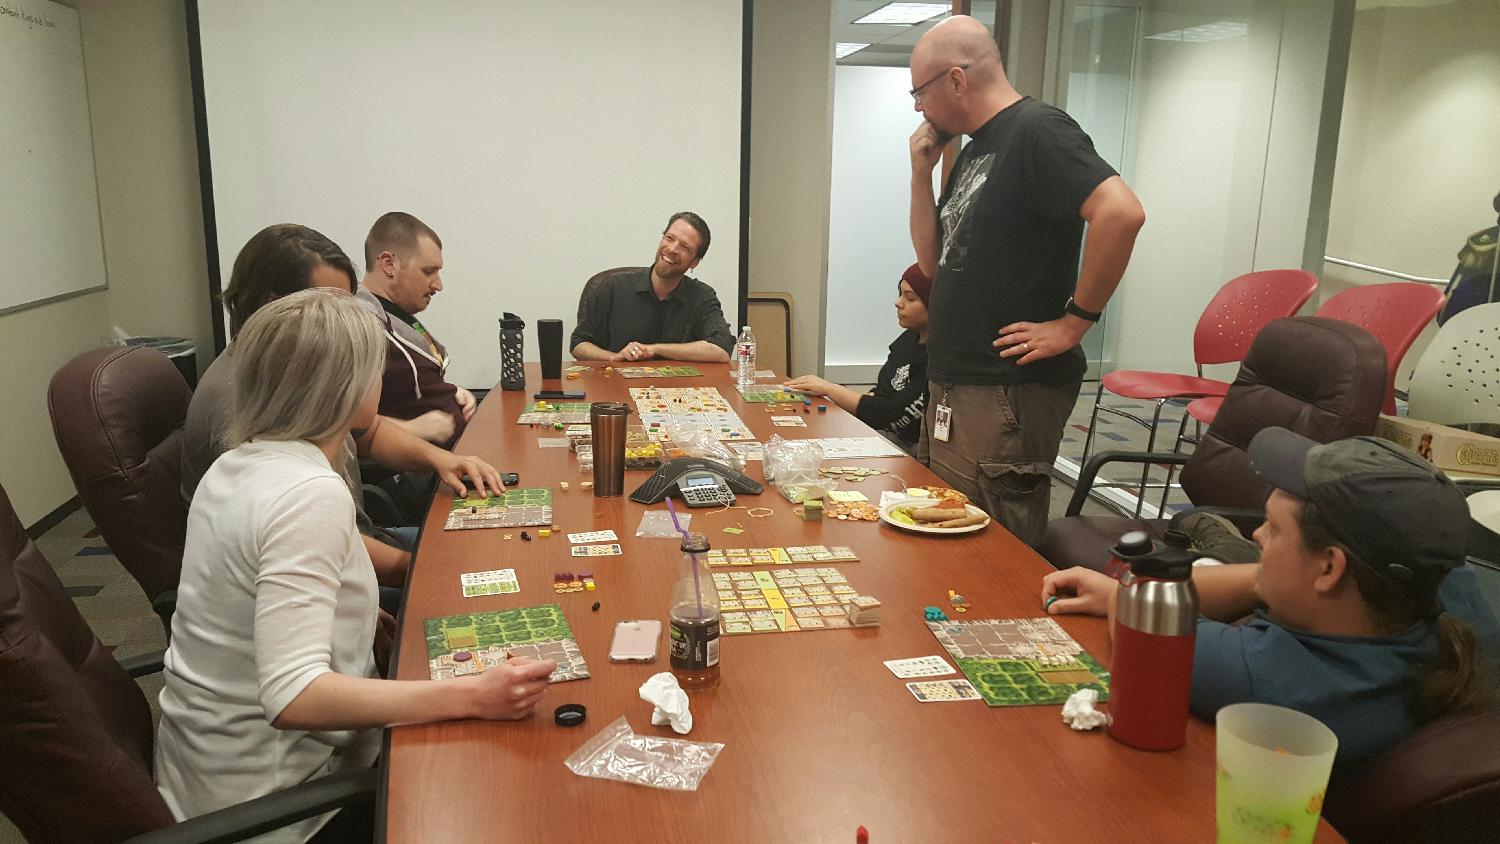 During on of our game days this group chose to play board games in a conference room. 